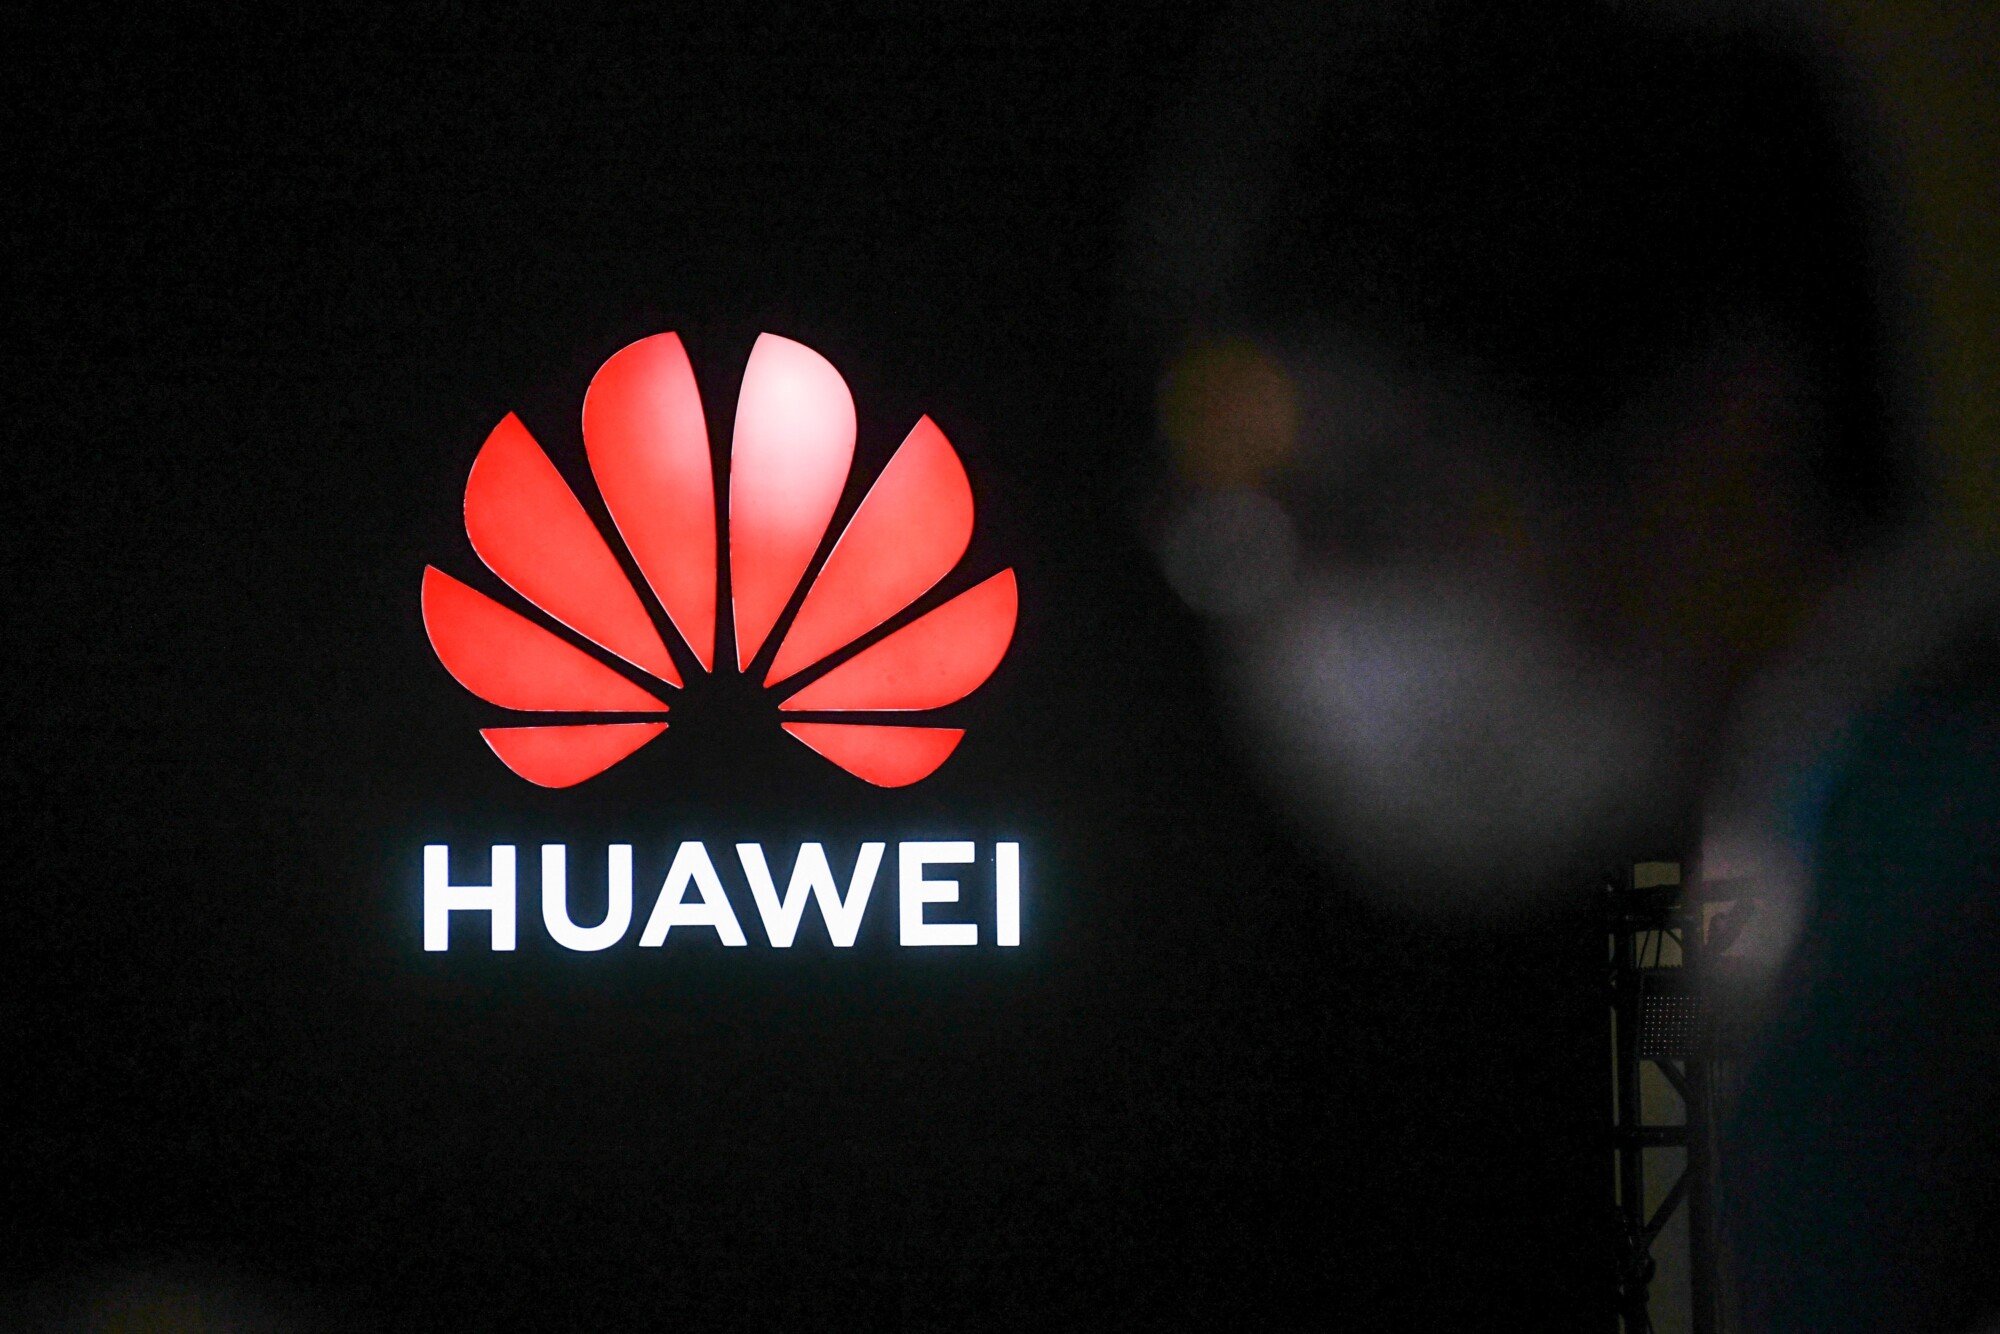 Huawei Founder Urges Shift to Software Development